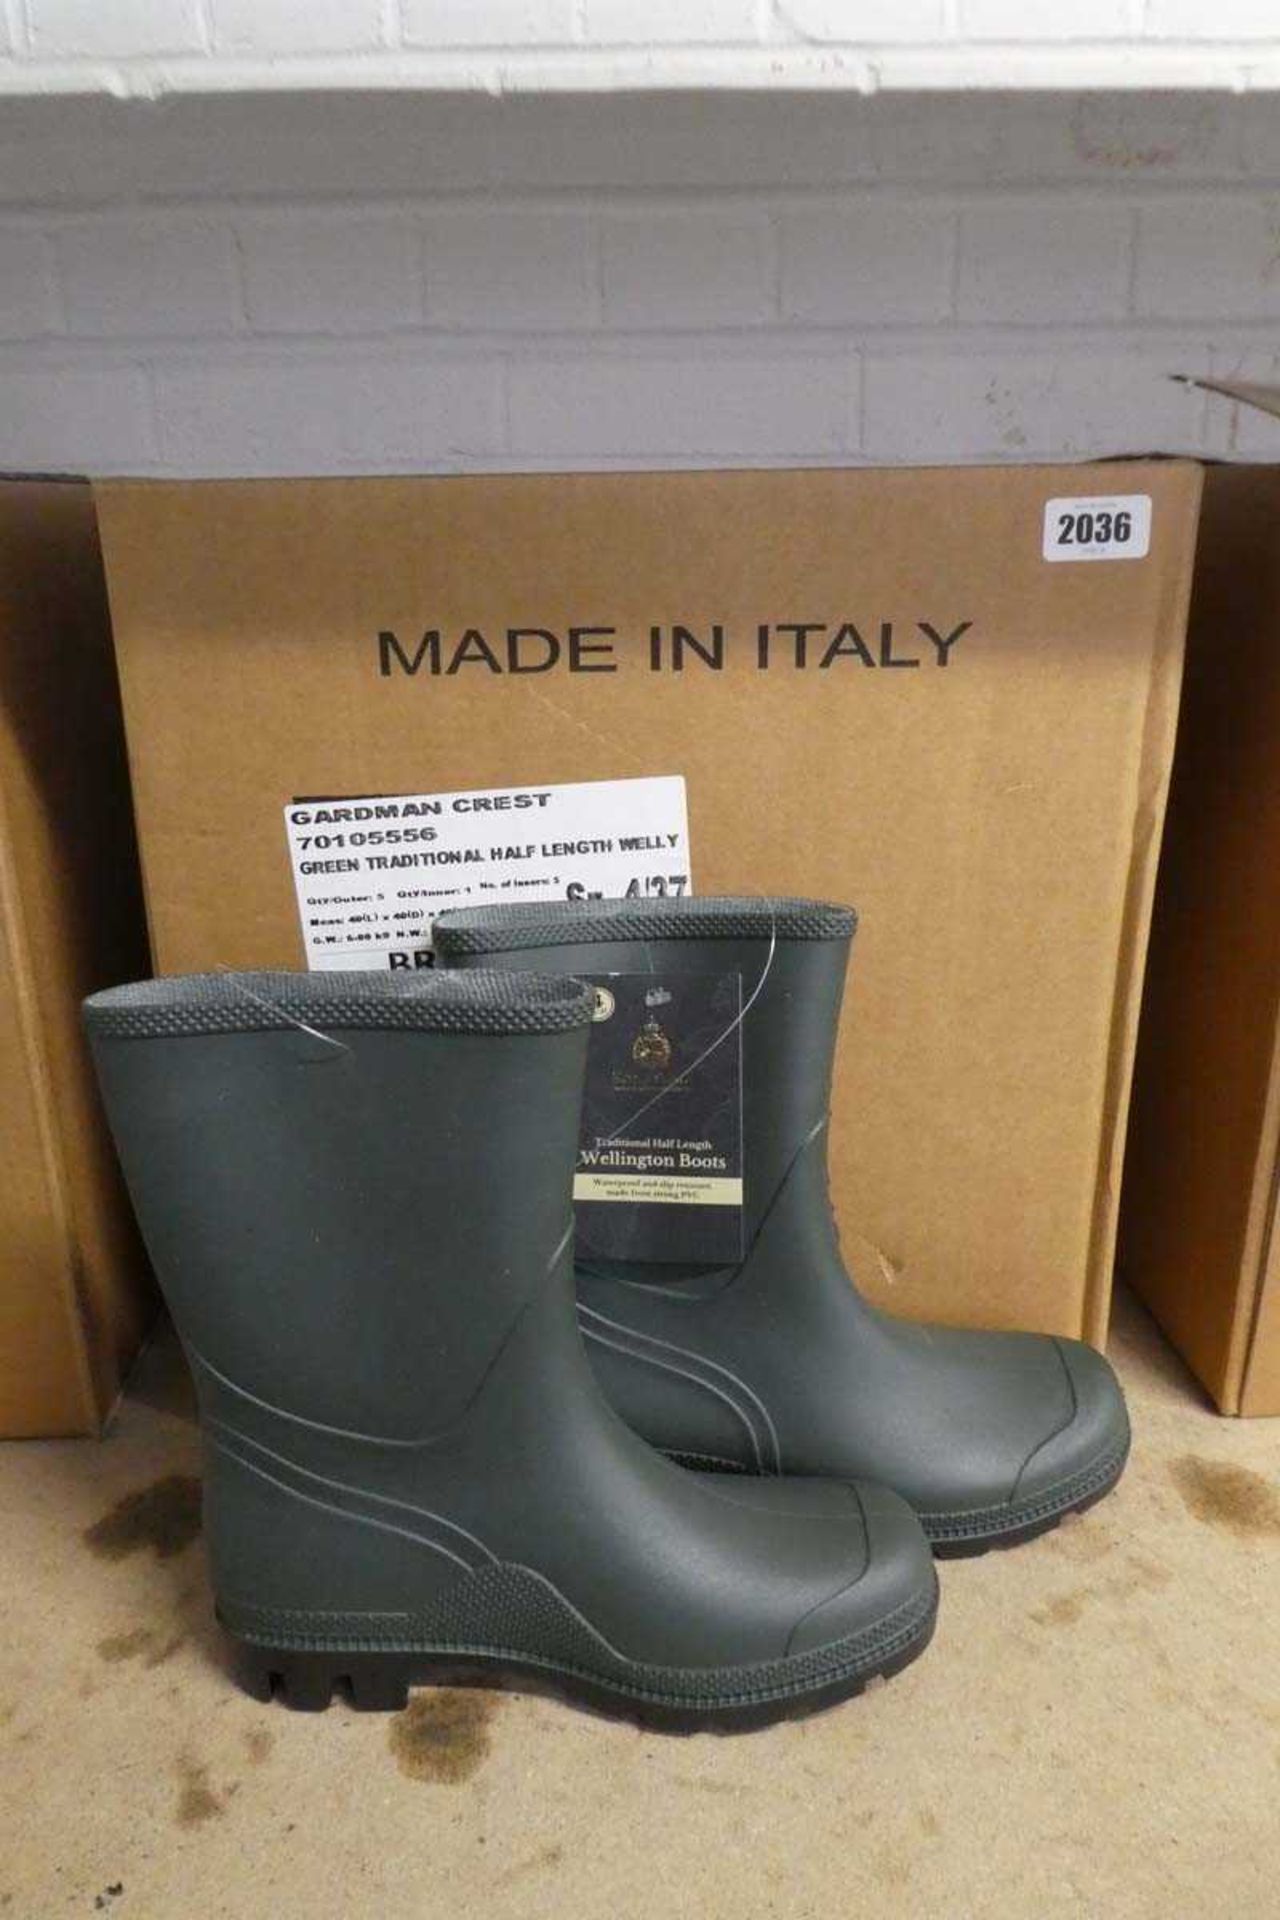 Box containing 5 pairs of Kent and Stowe green traditional half length wellies - size UK4